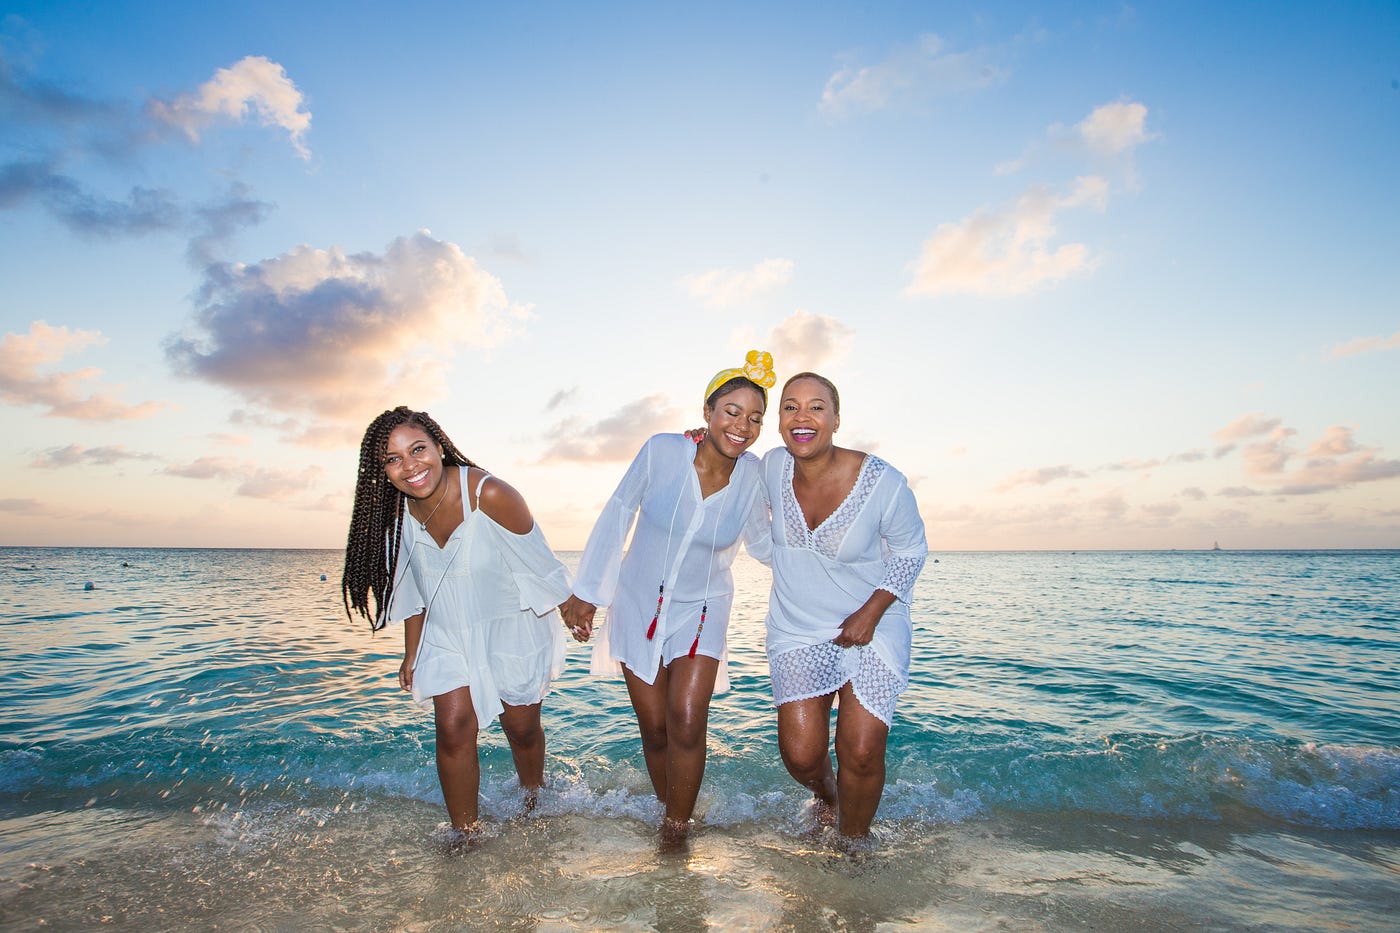 Three Black women, dressed in white, smile as they emerge from the ocean. New breast cancer screening guidelines from the US Preventative Task Force may prevent an estimated 1.8 breast cancer deaths per 1,000.